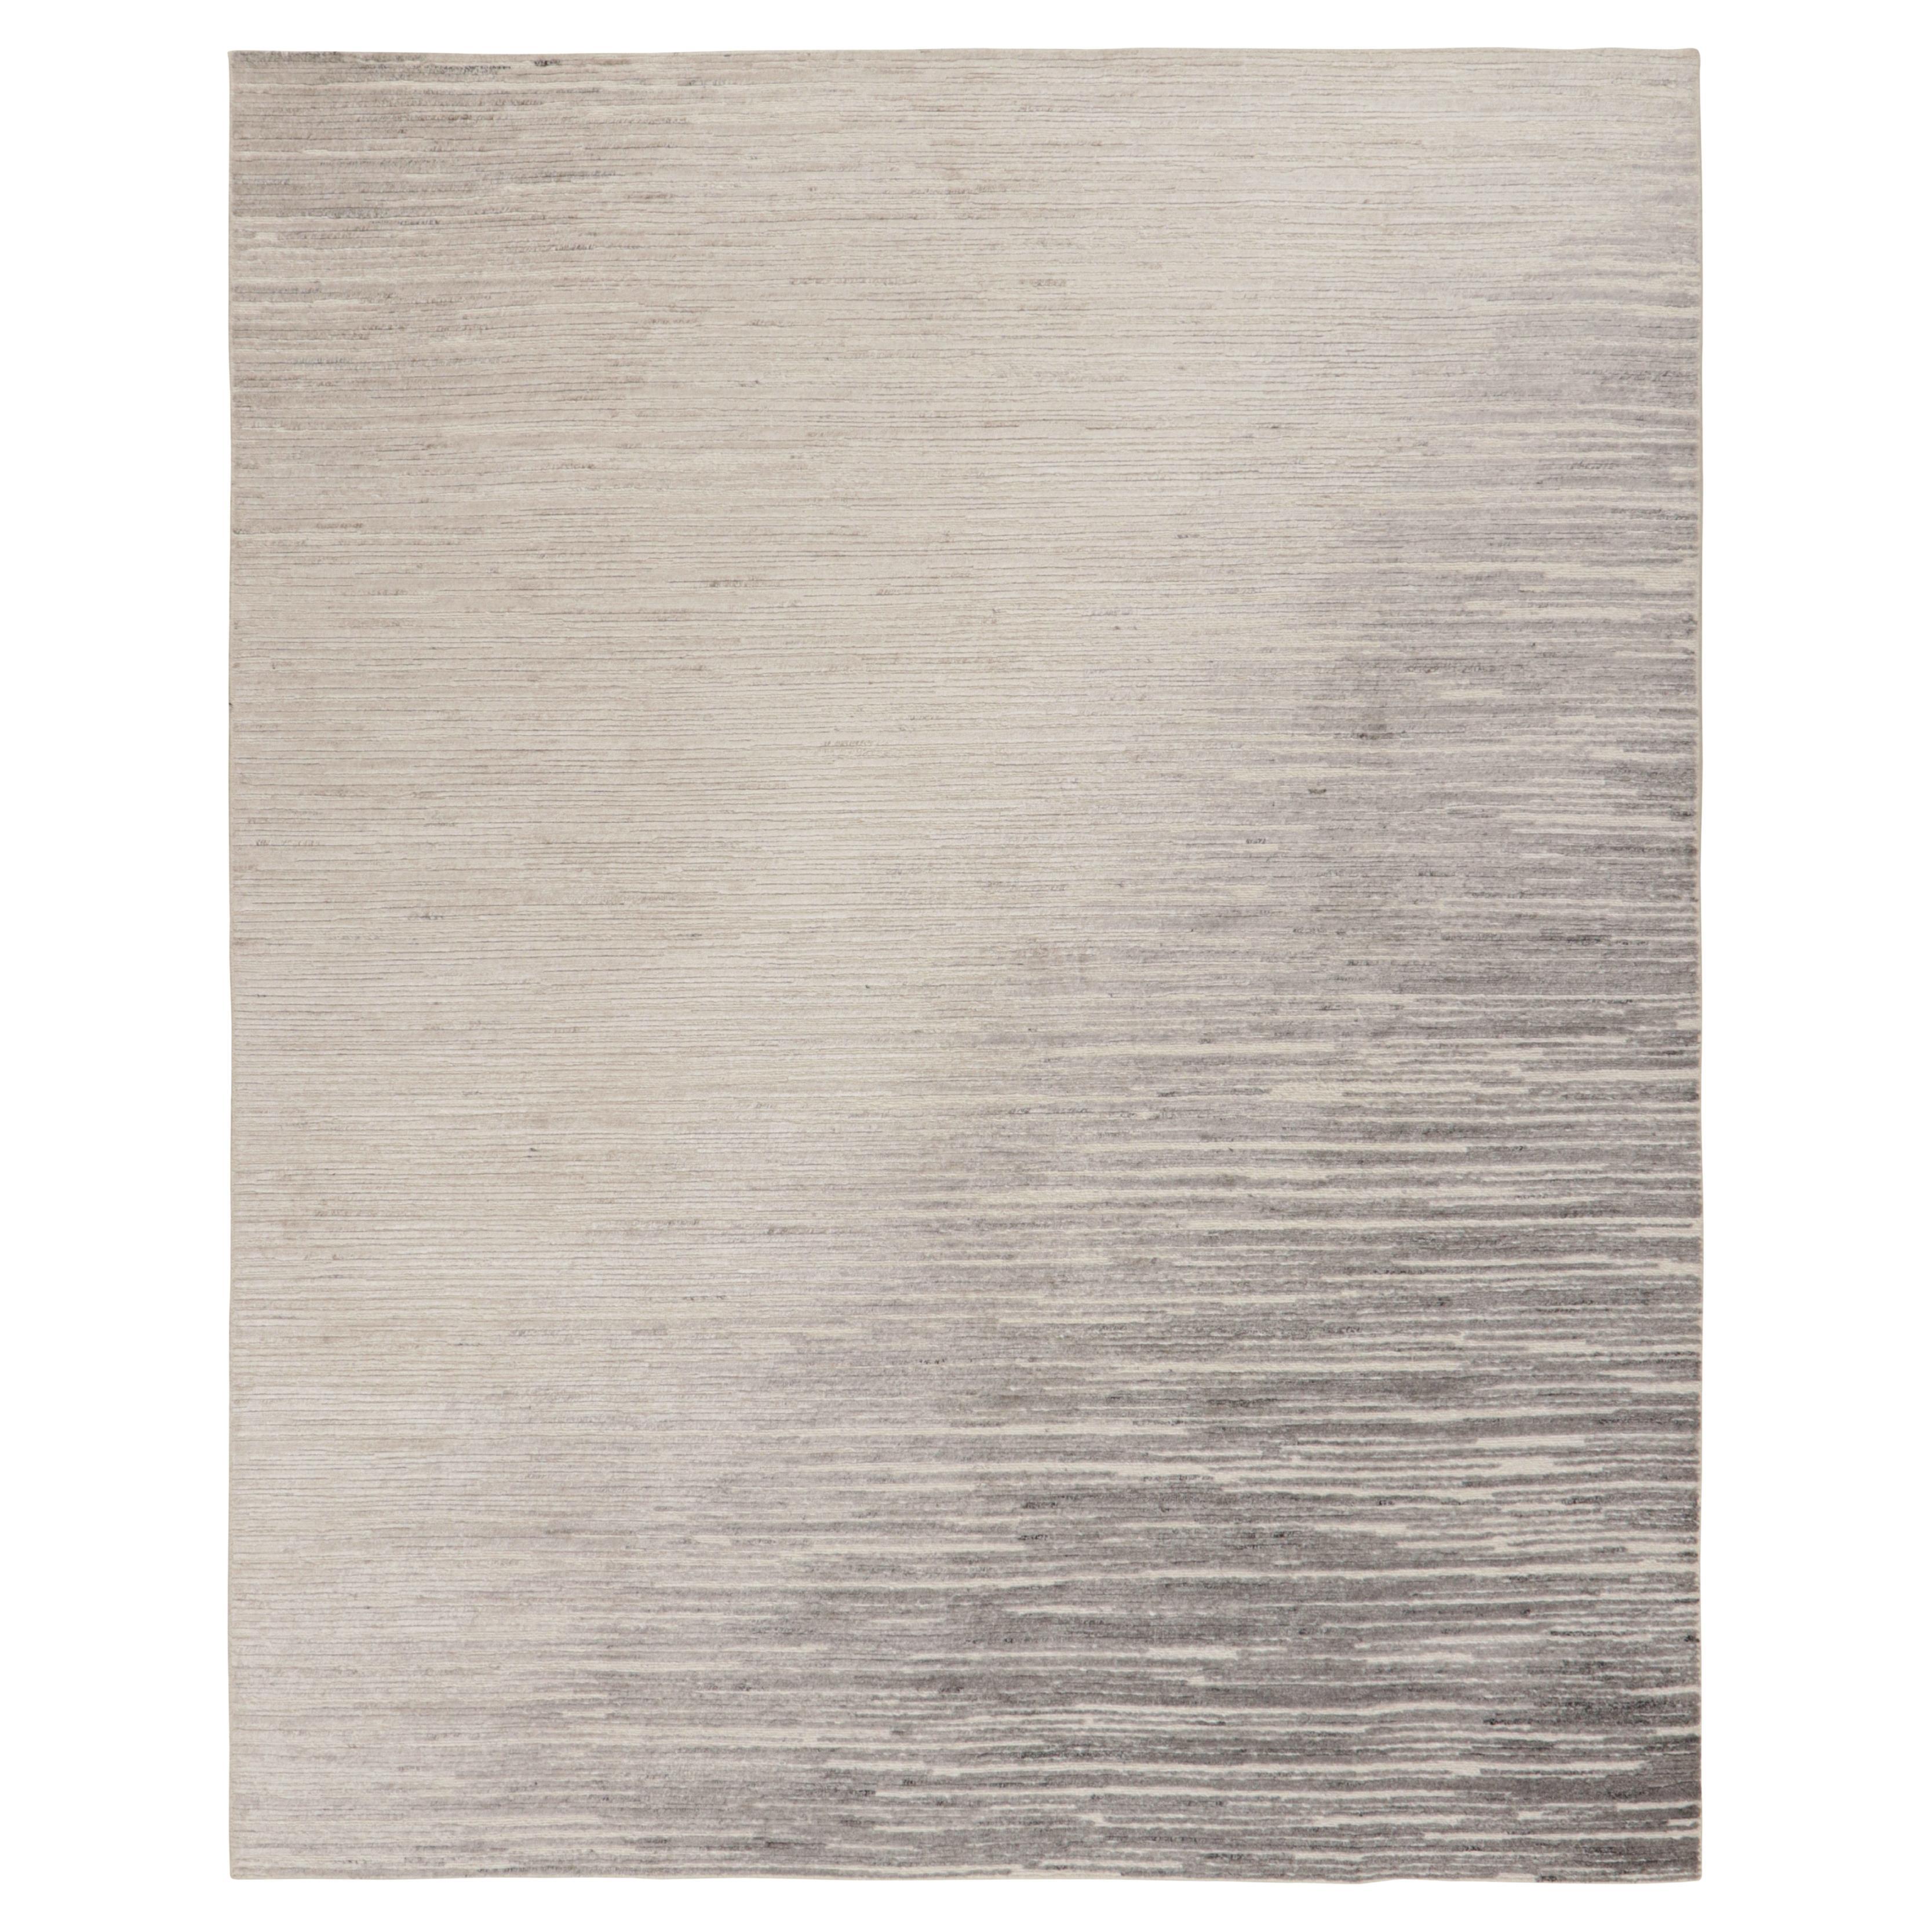 Rug & Kilim’s Textural Rug in White and Gray Abstract High-Low Stripes